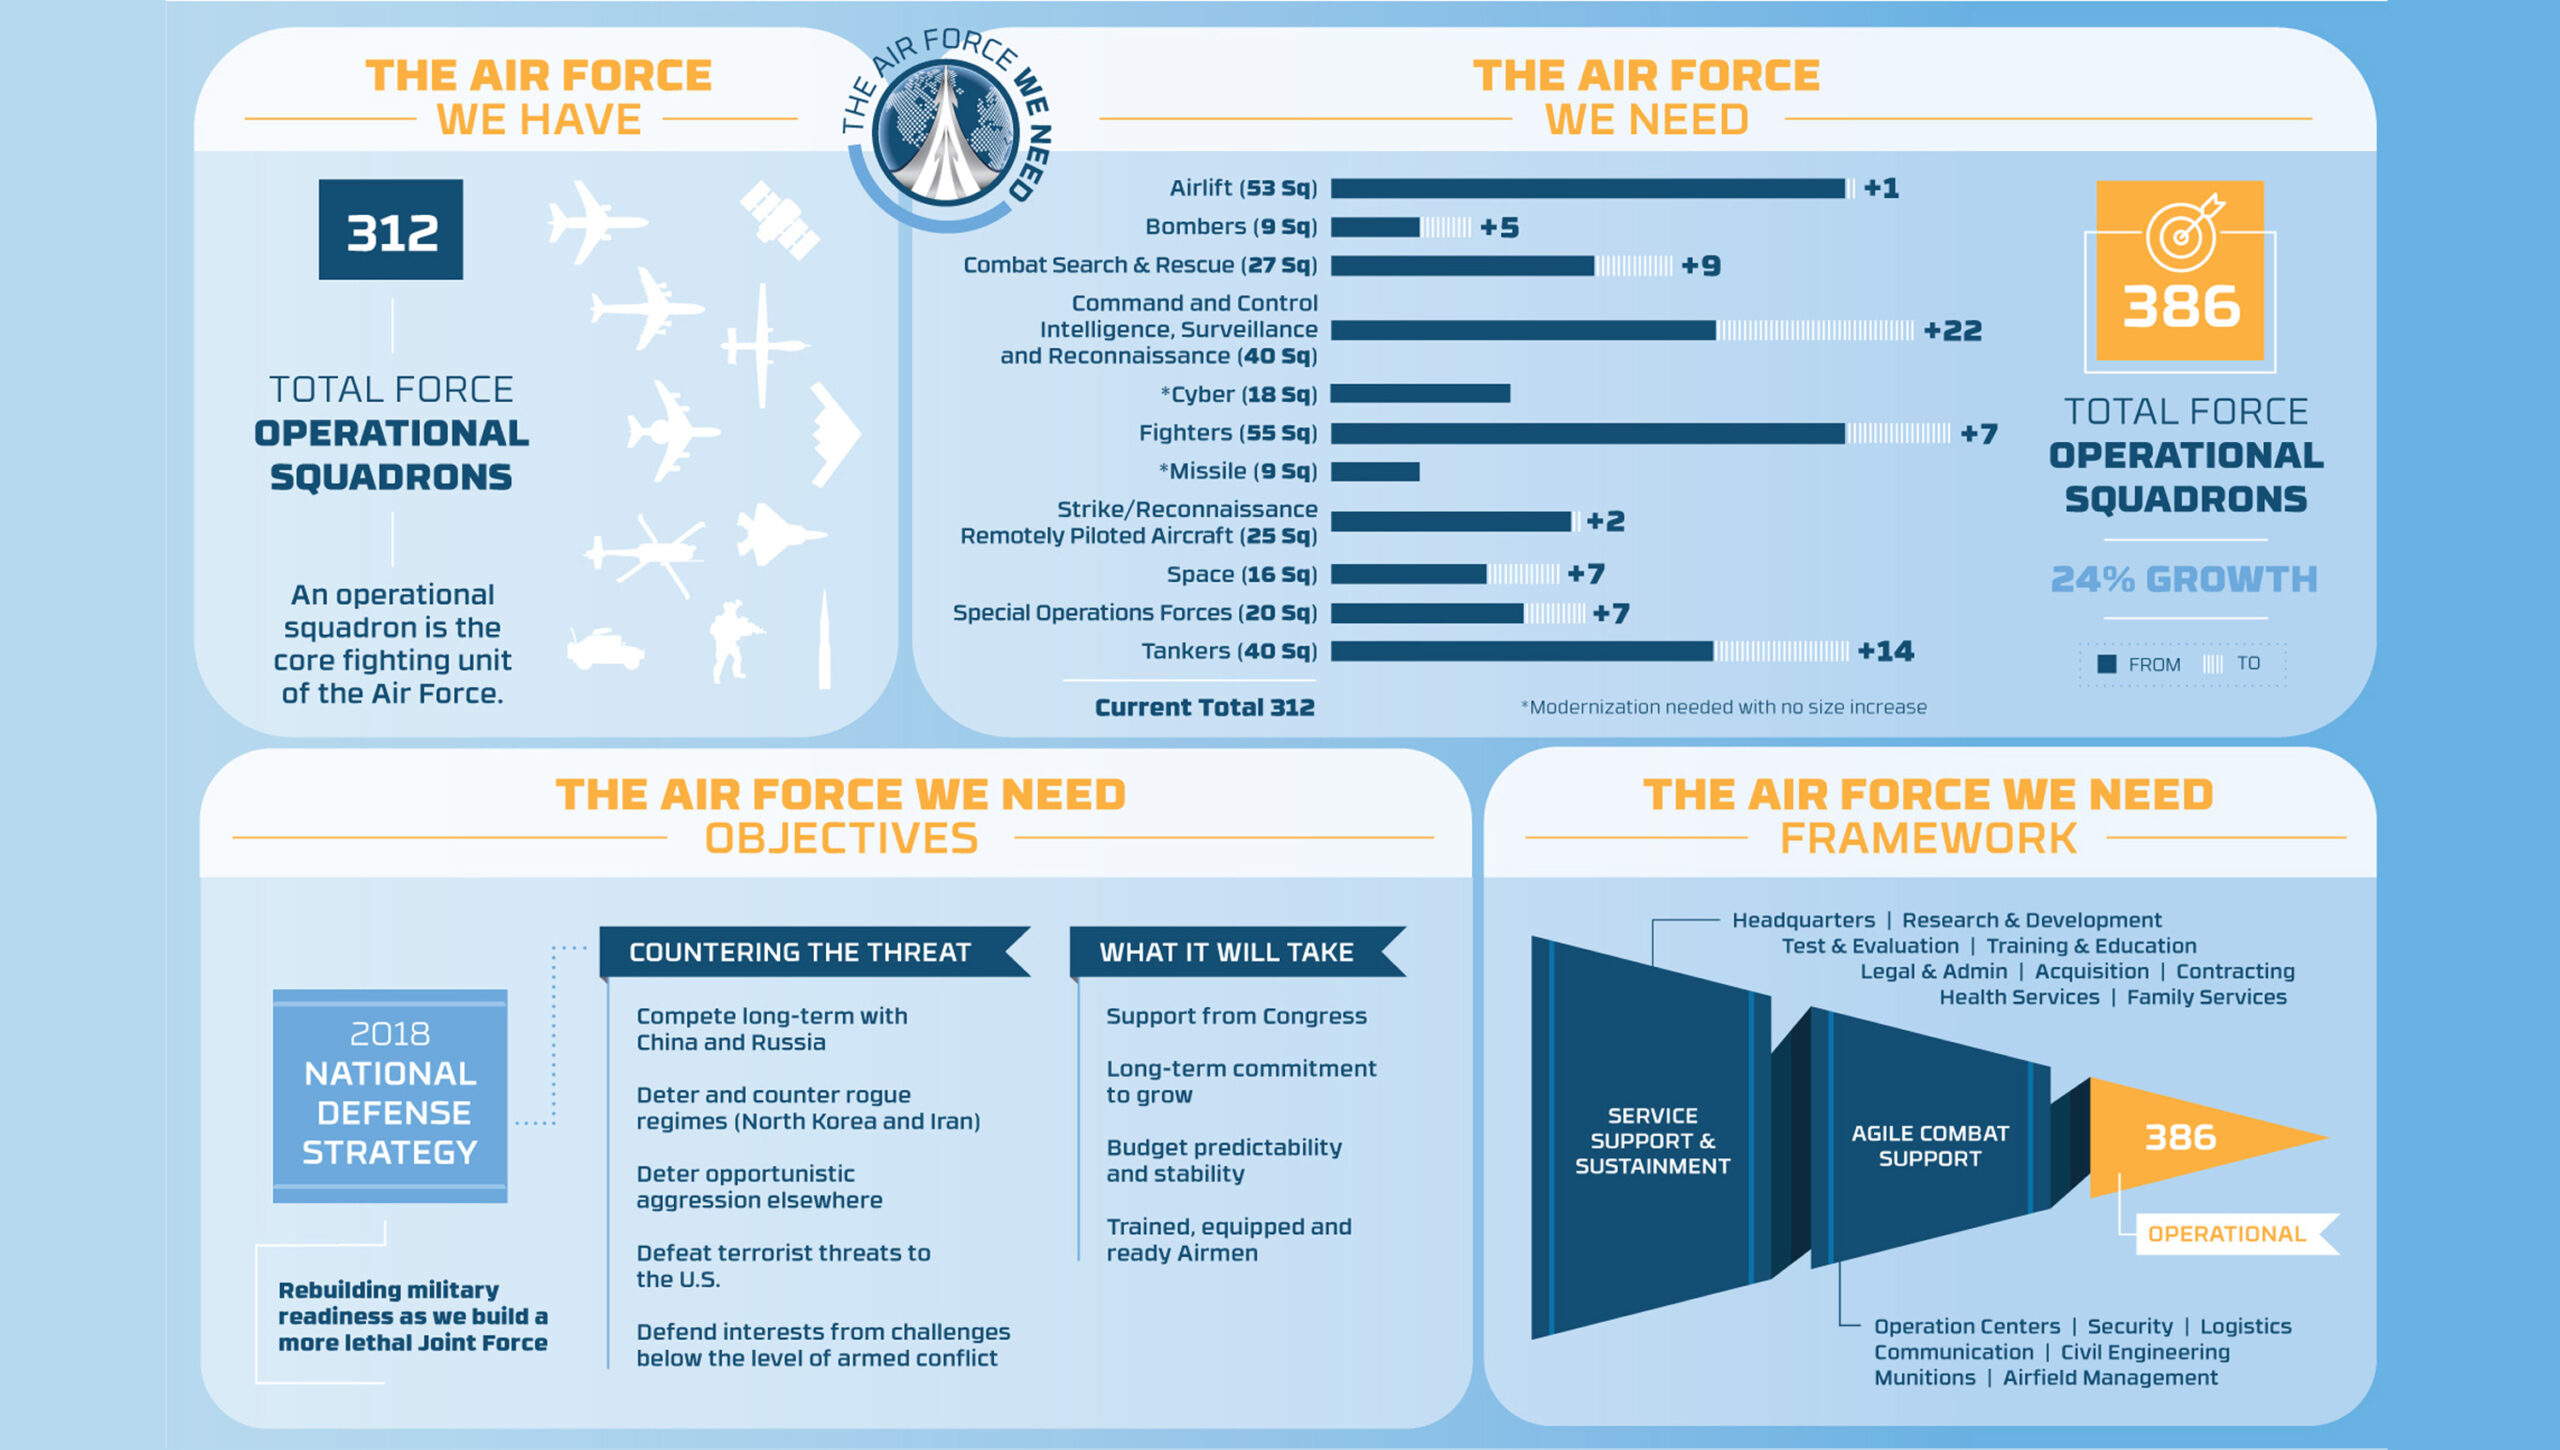 CSIS Expert Calls Out USAF: 386 Squadrons & $13B Space Force Are Guesswork